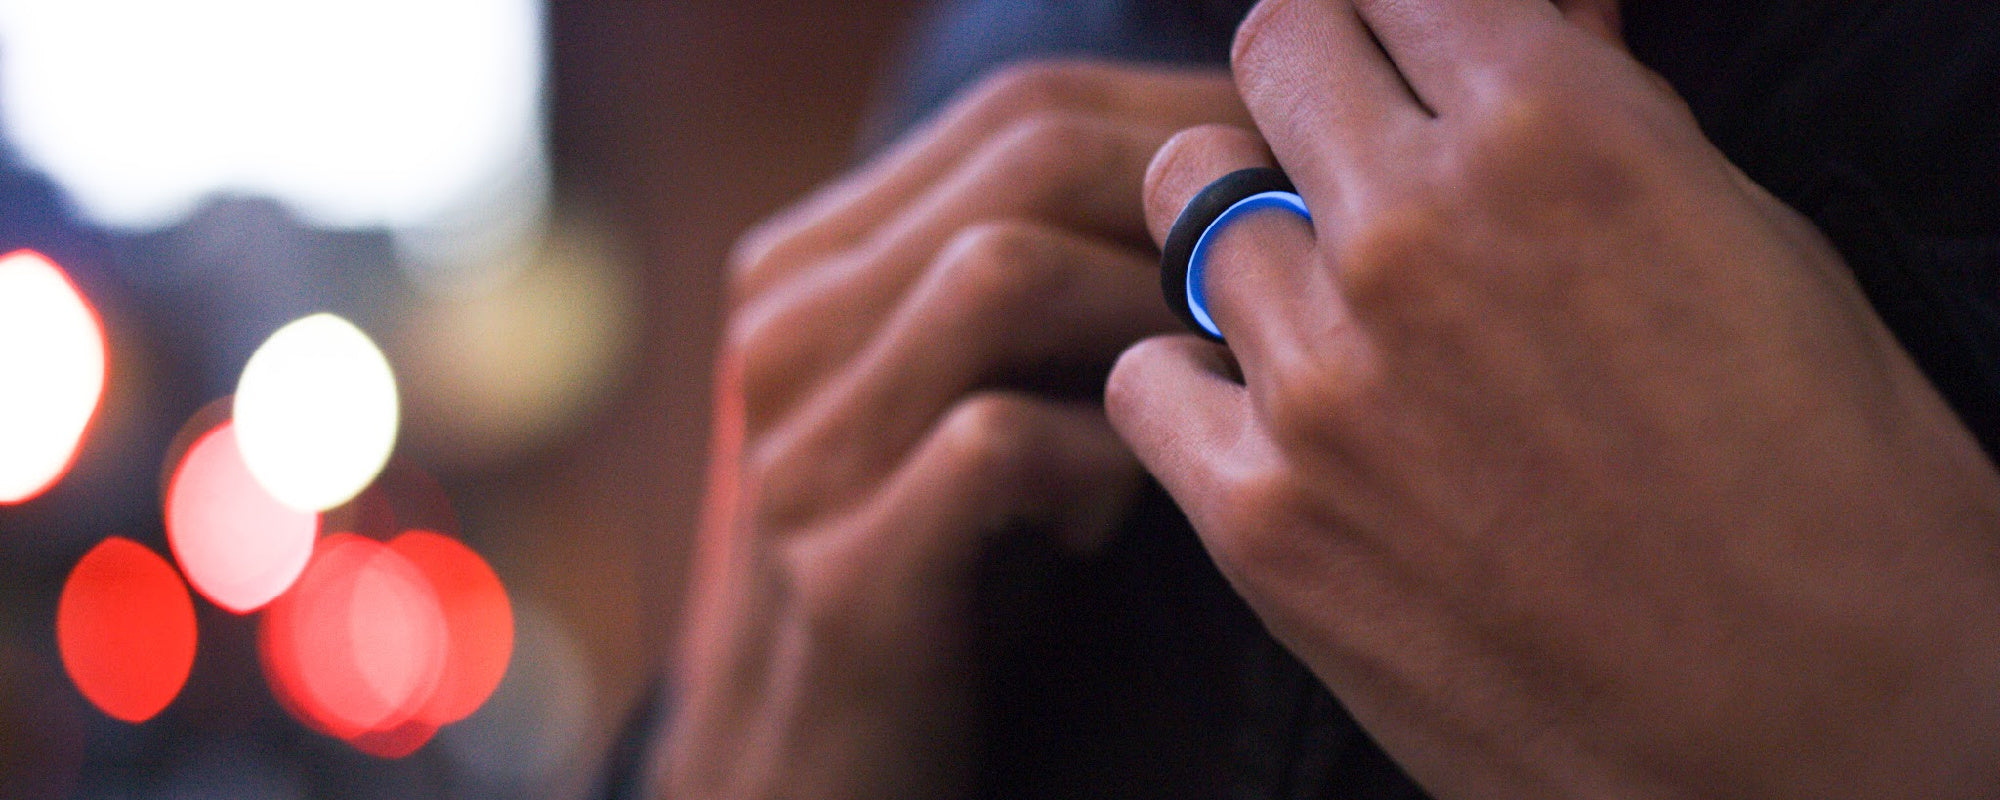 Forged carbon fiber ring with blue glow interior featured on a hand model. 